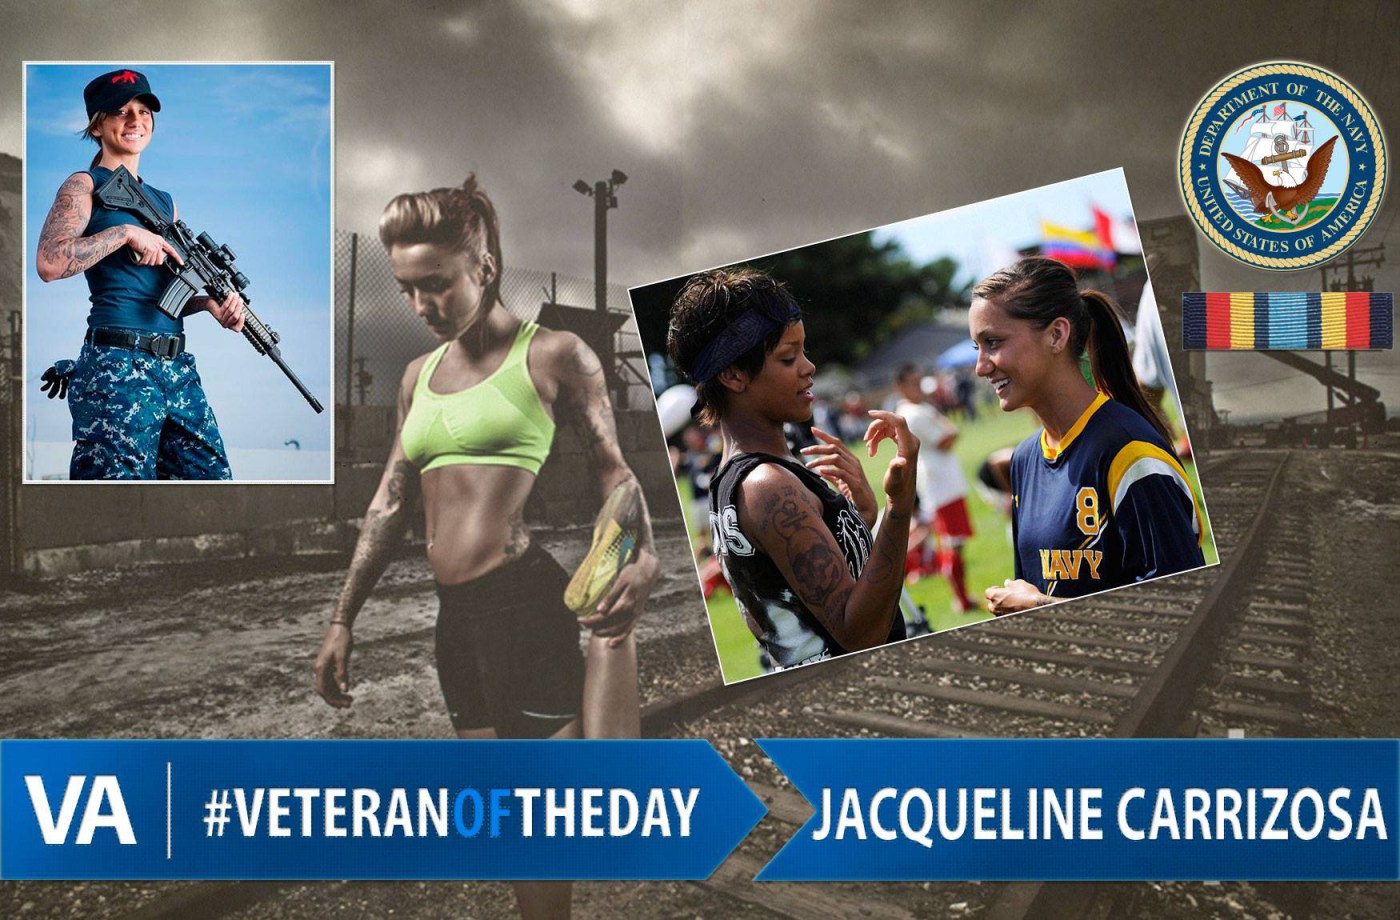 Veteran of the day Jacqueline Carrizosa